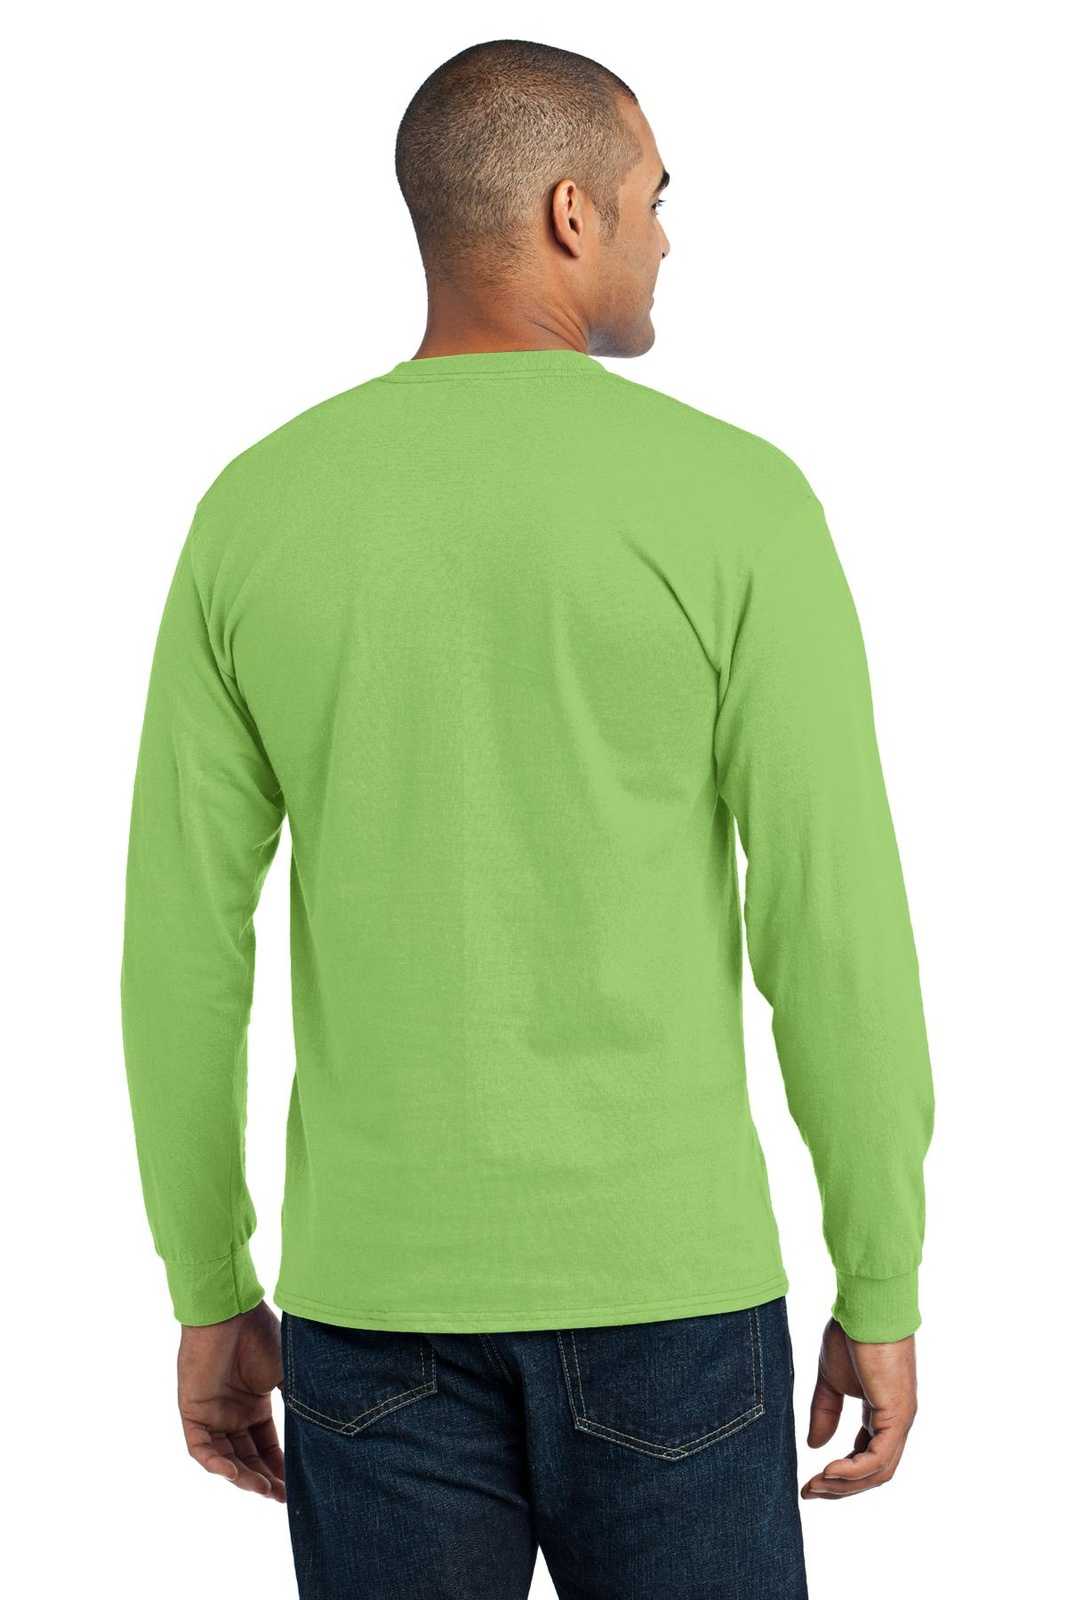 Port & Company PC55LS Long Sleeve Core Blend Tee - Lime - HIT a Double - 1